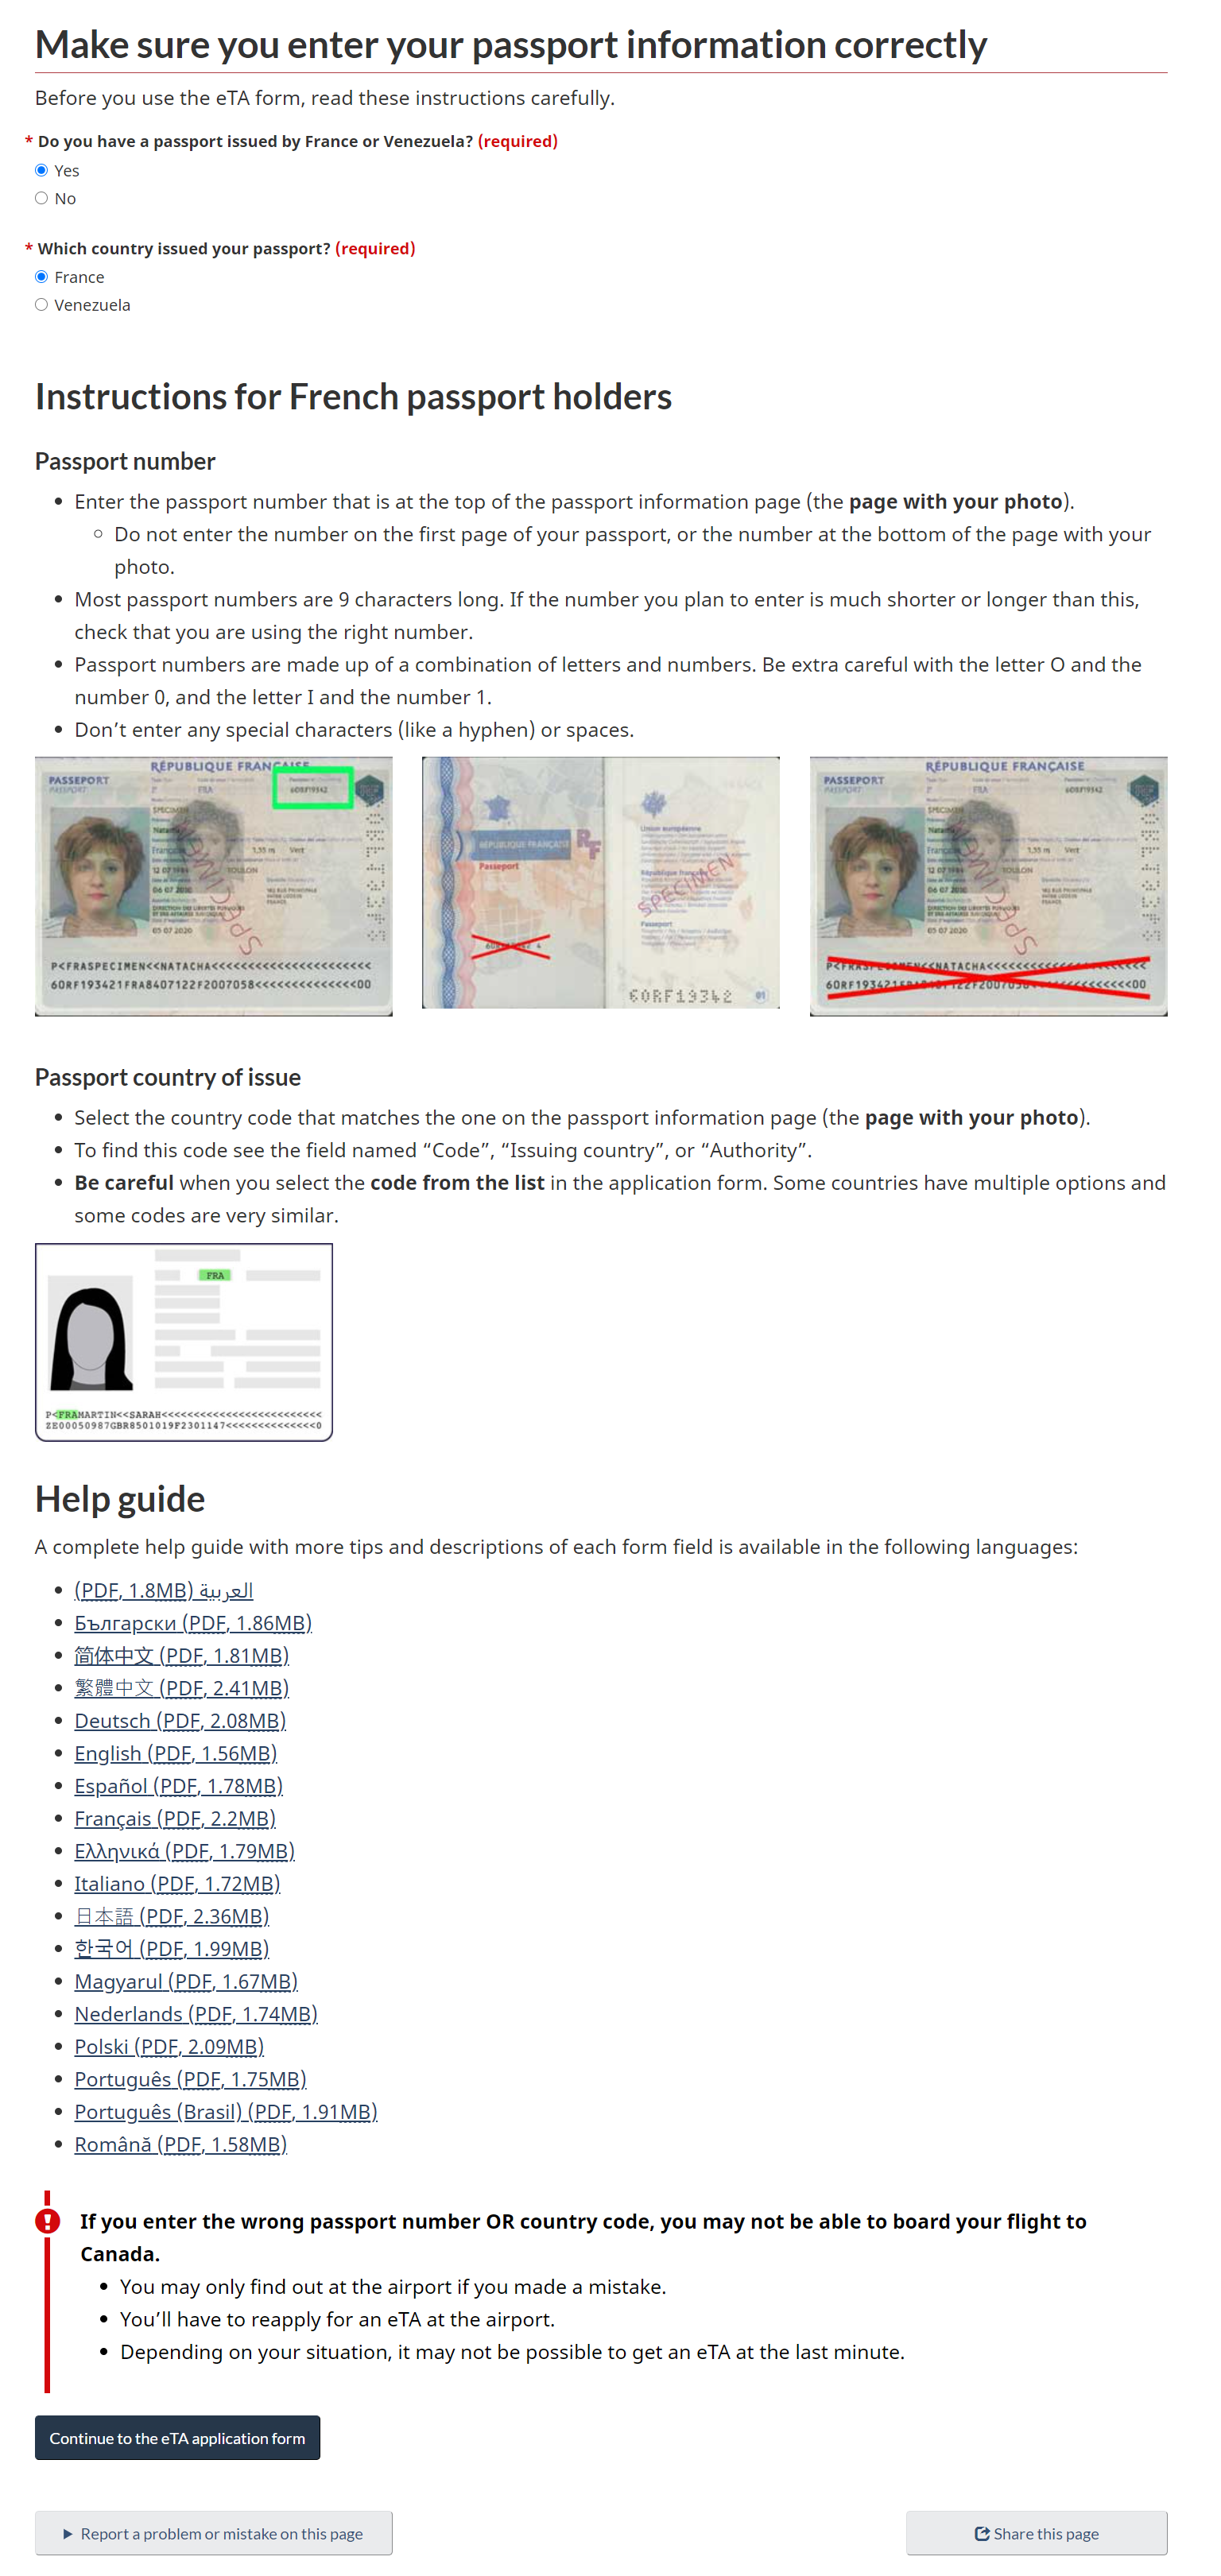 Instructions for French passport holders